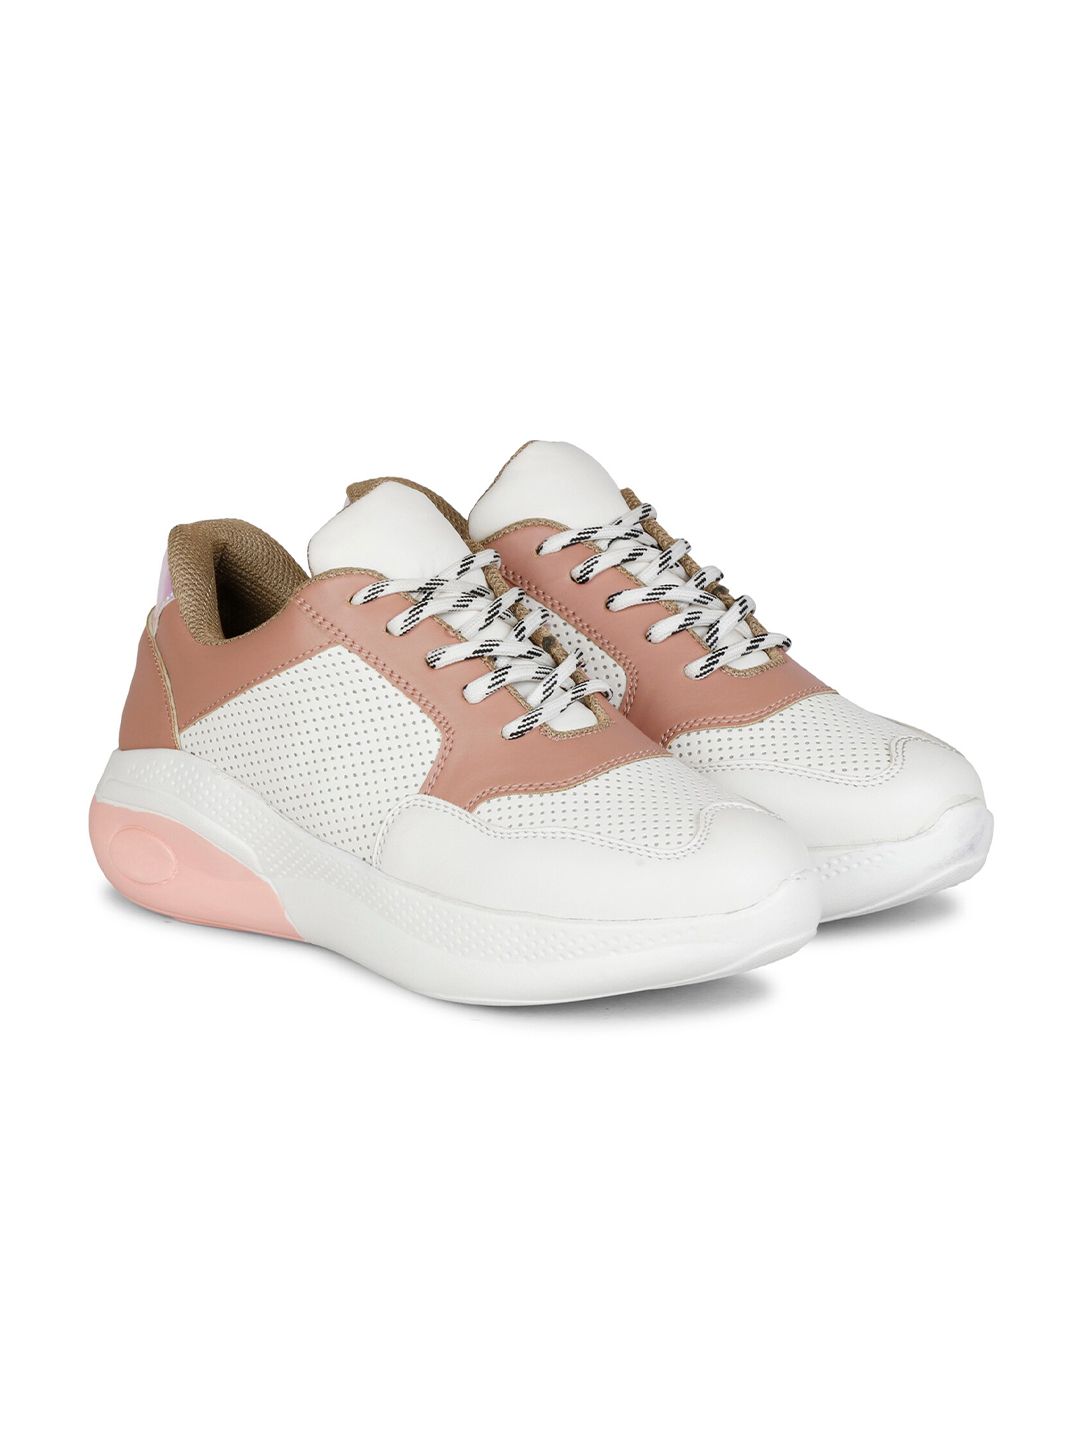 Denill Women Peach-Coloured Mesh Running Shoes Price in India